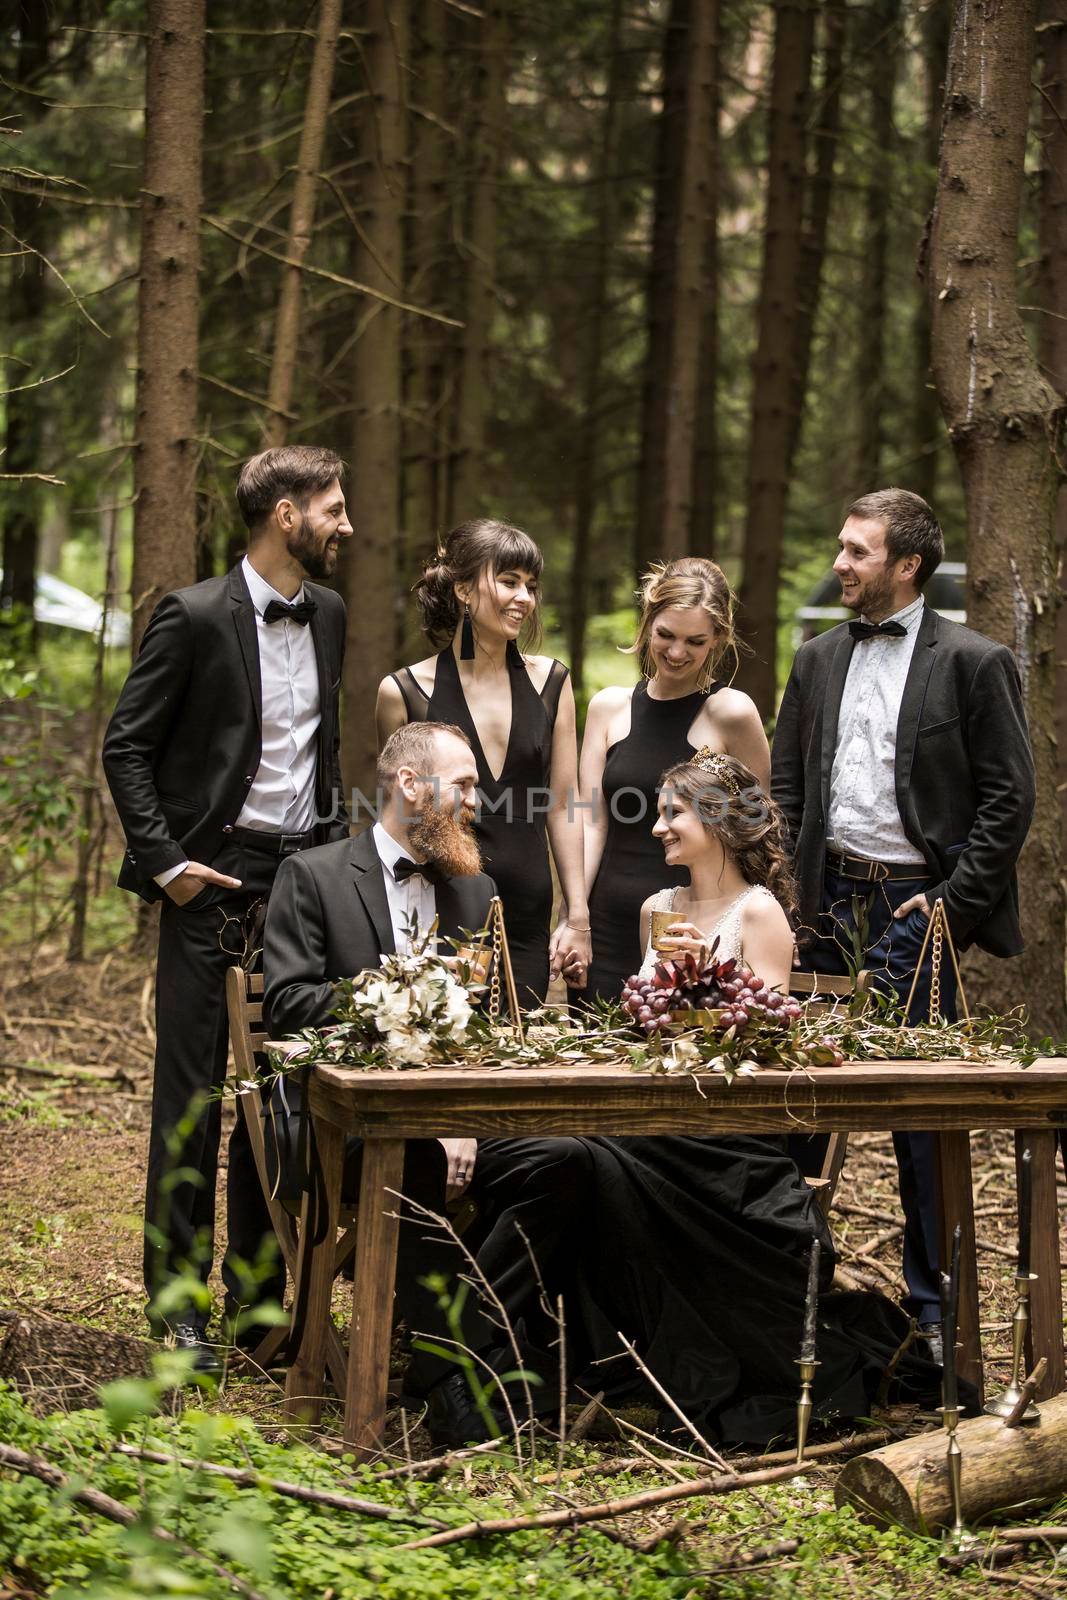 married and the witnesses at the marriage ceremony in the woods